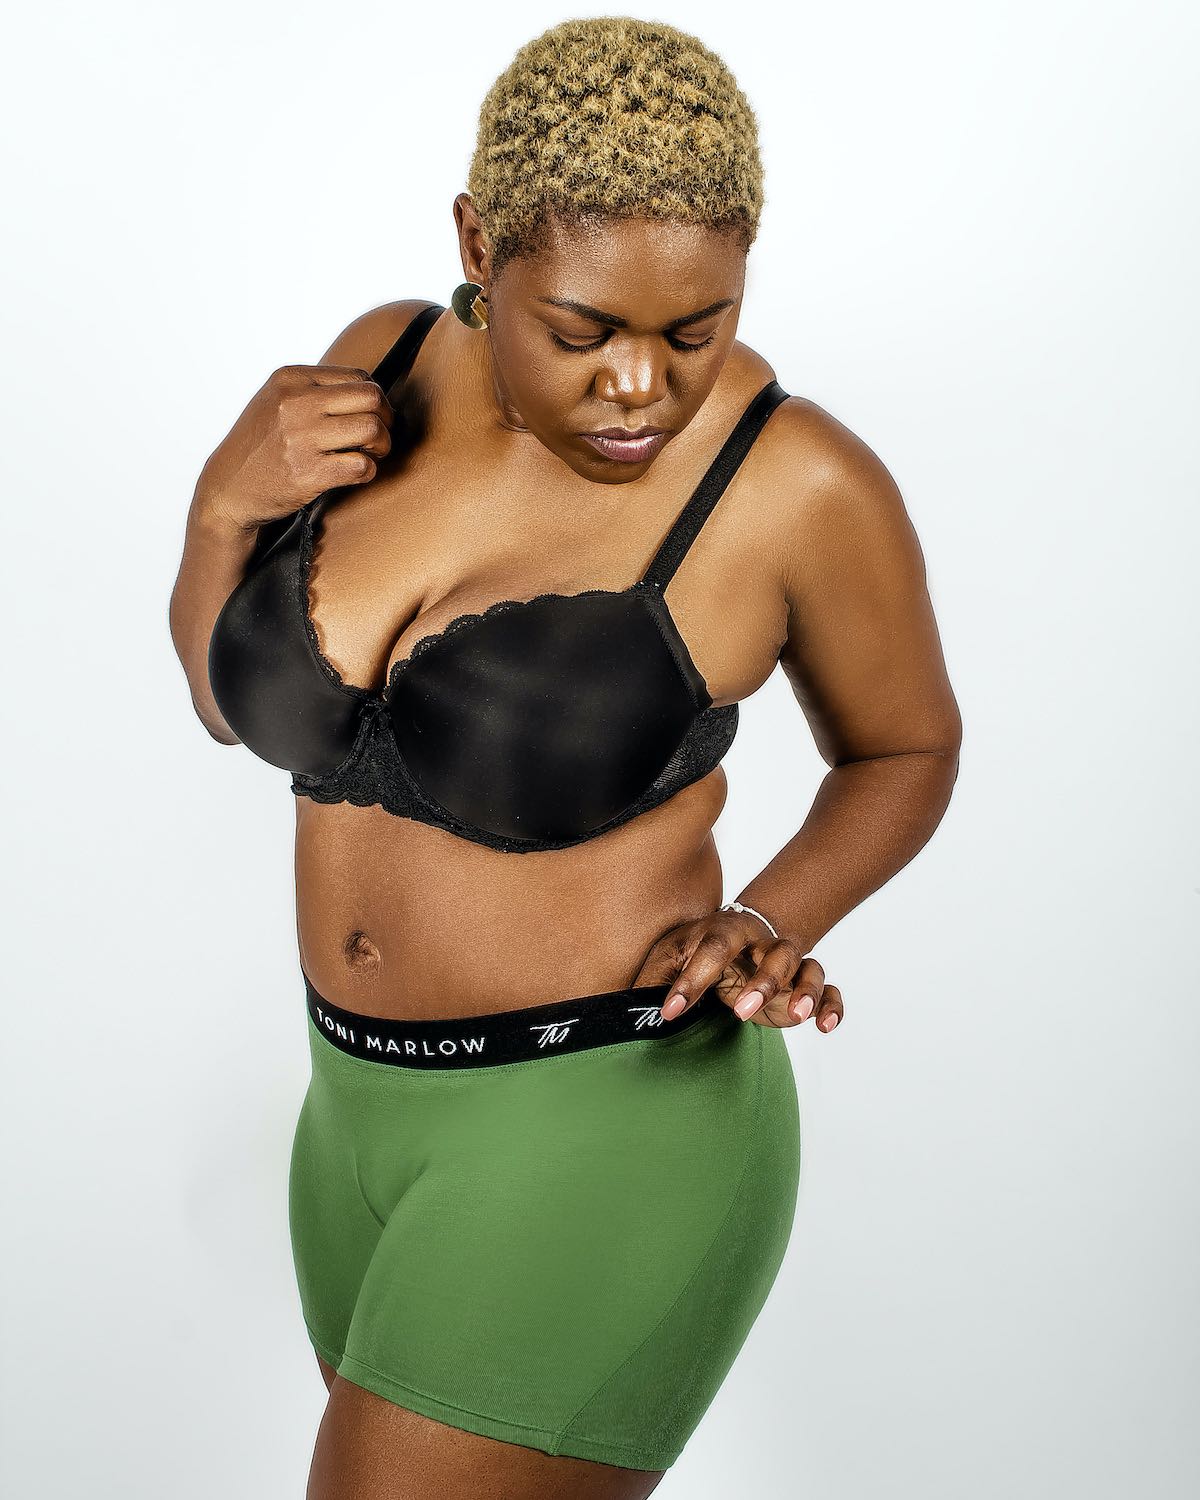 Model wearing a black bra and green Toni Marlow boxer briefs